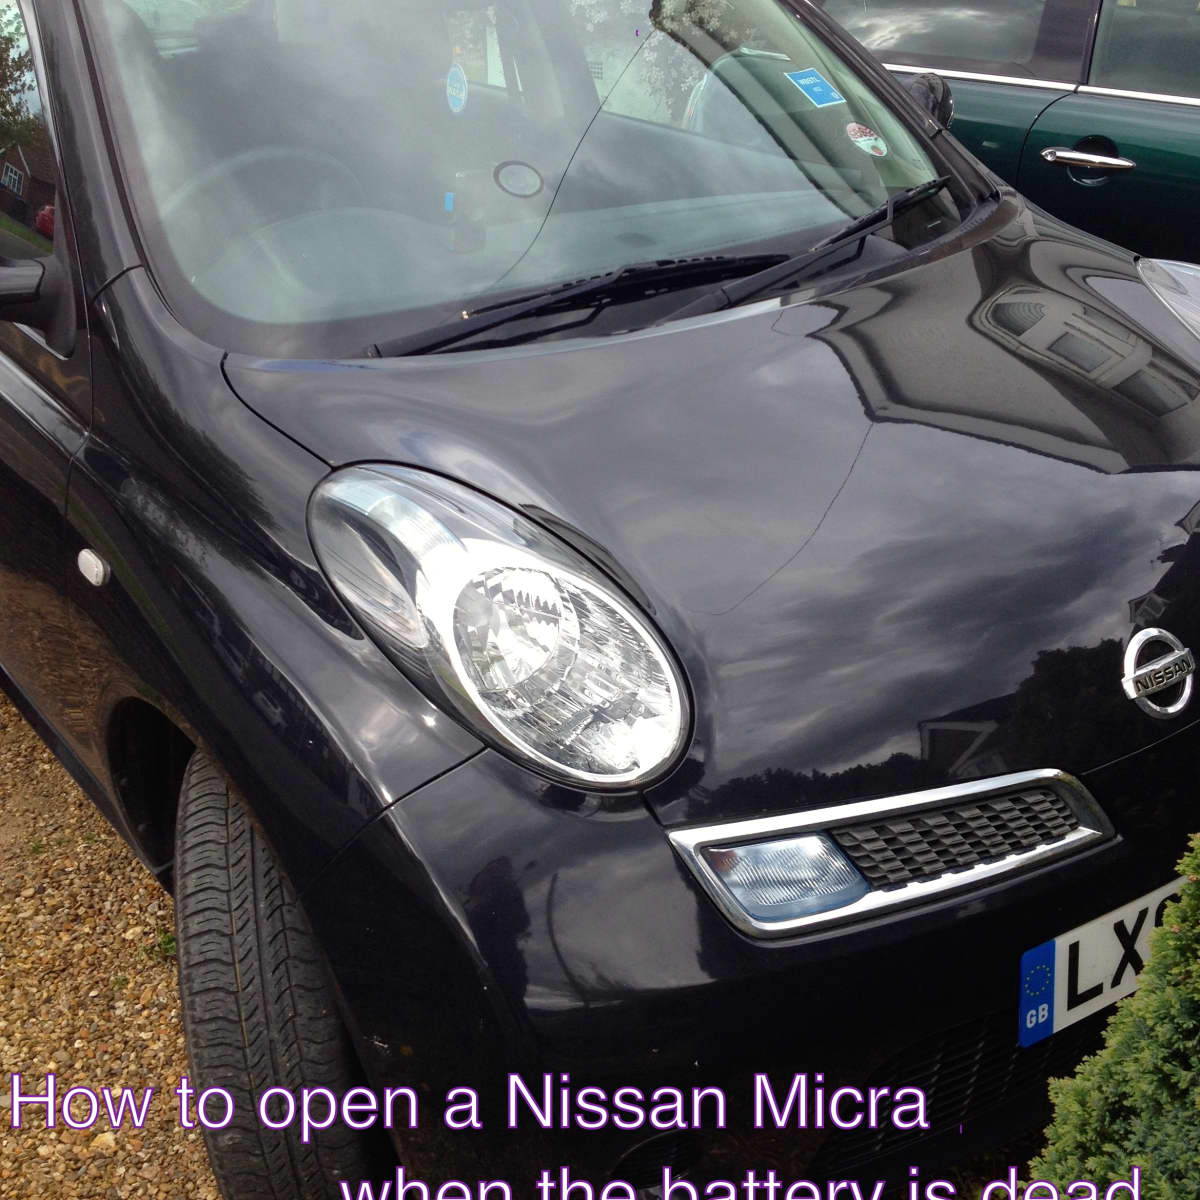 How To Open The Door To A Nissan Micra When The Battery Is Dead, With Pictures - Axleaddict